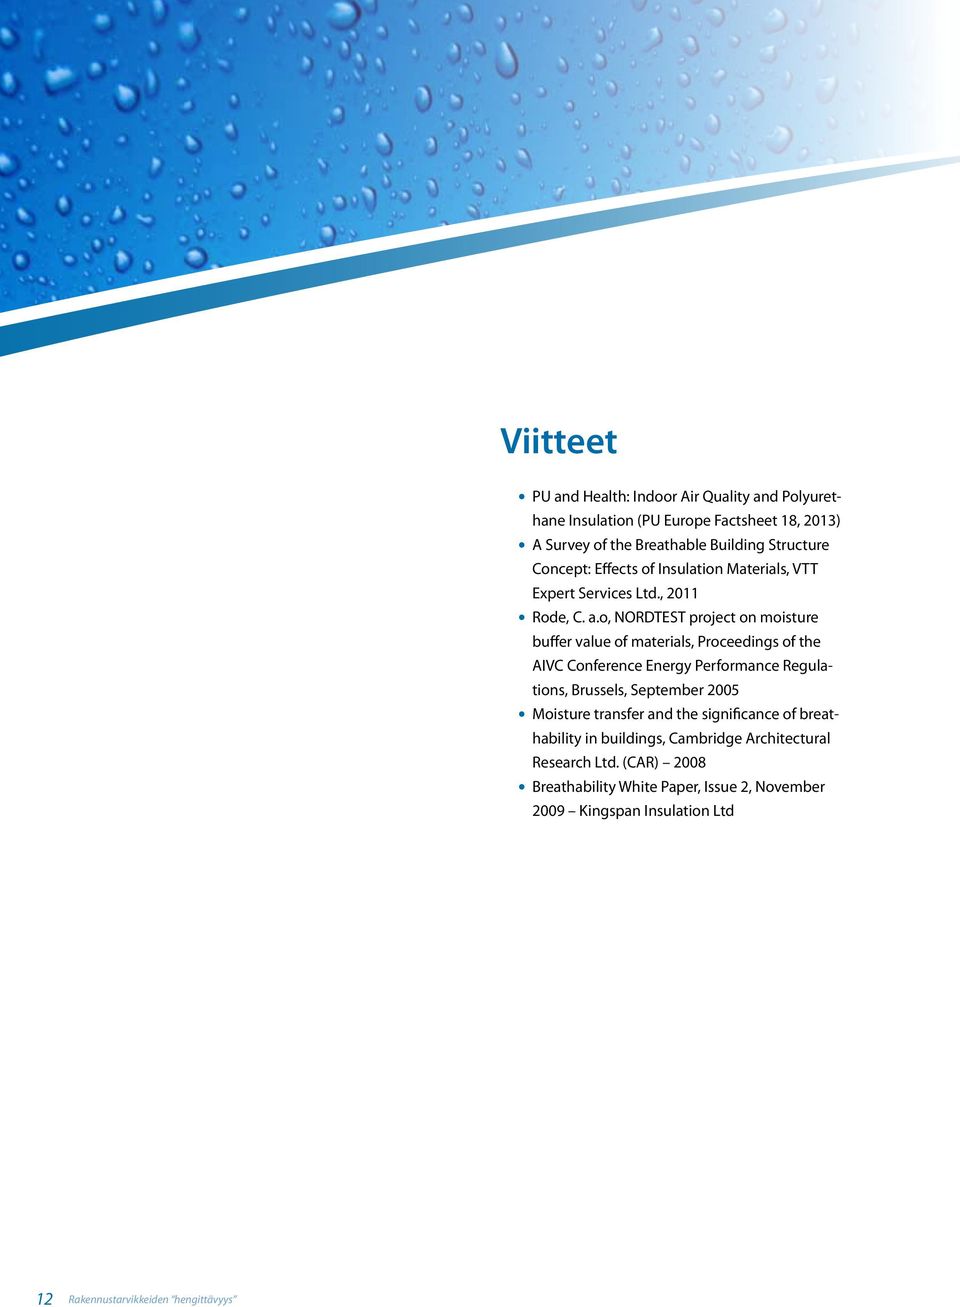 o, NORDTEST project on moisture buffer value of materials, Proceedings of the AIVC Conference Energy Performance Regulations, Brussels, September 2005